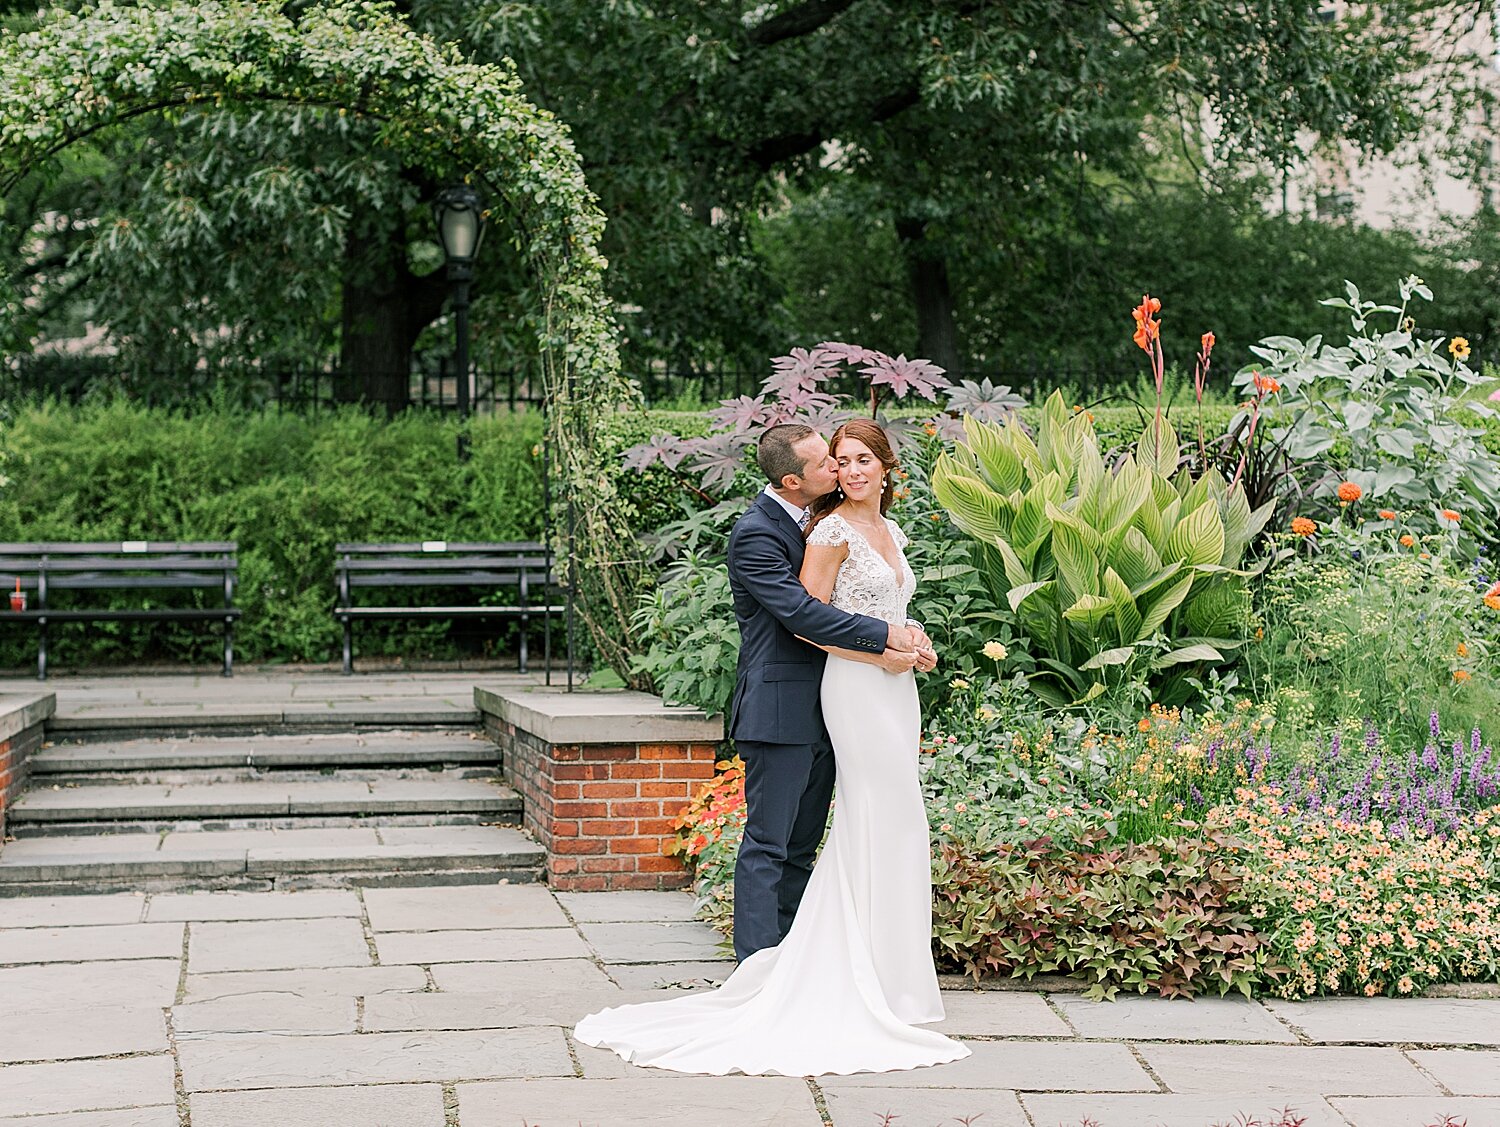 groom hugs bride during wedding photos in NYC | Asher Gardner Photography | Elopement at the Central Park Conservatory Gardens